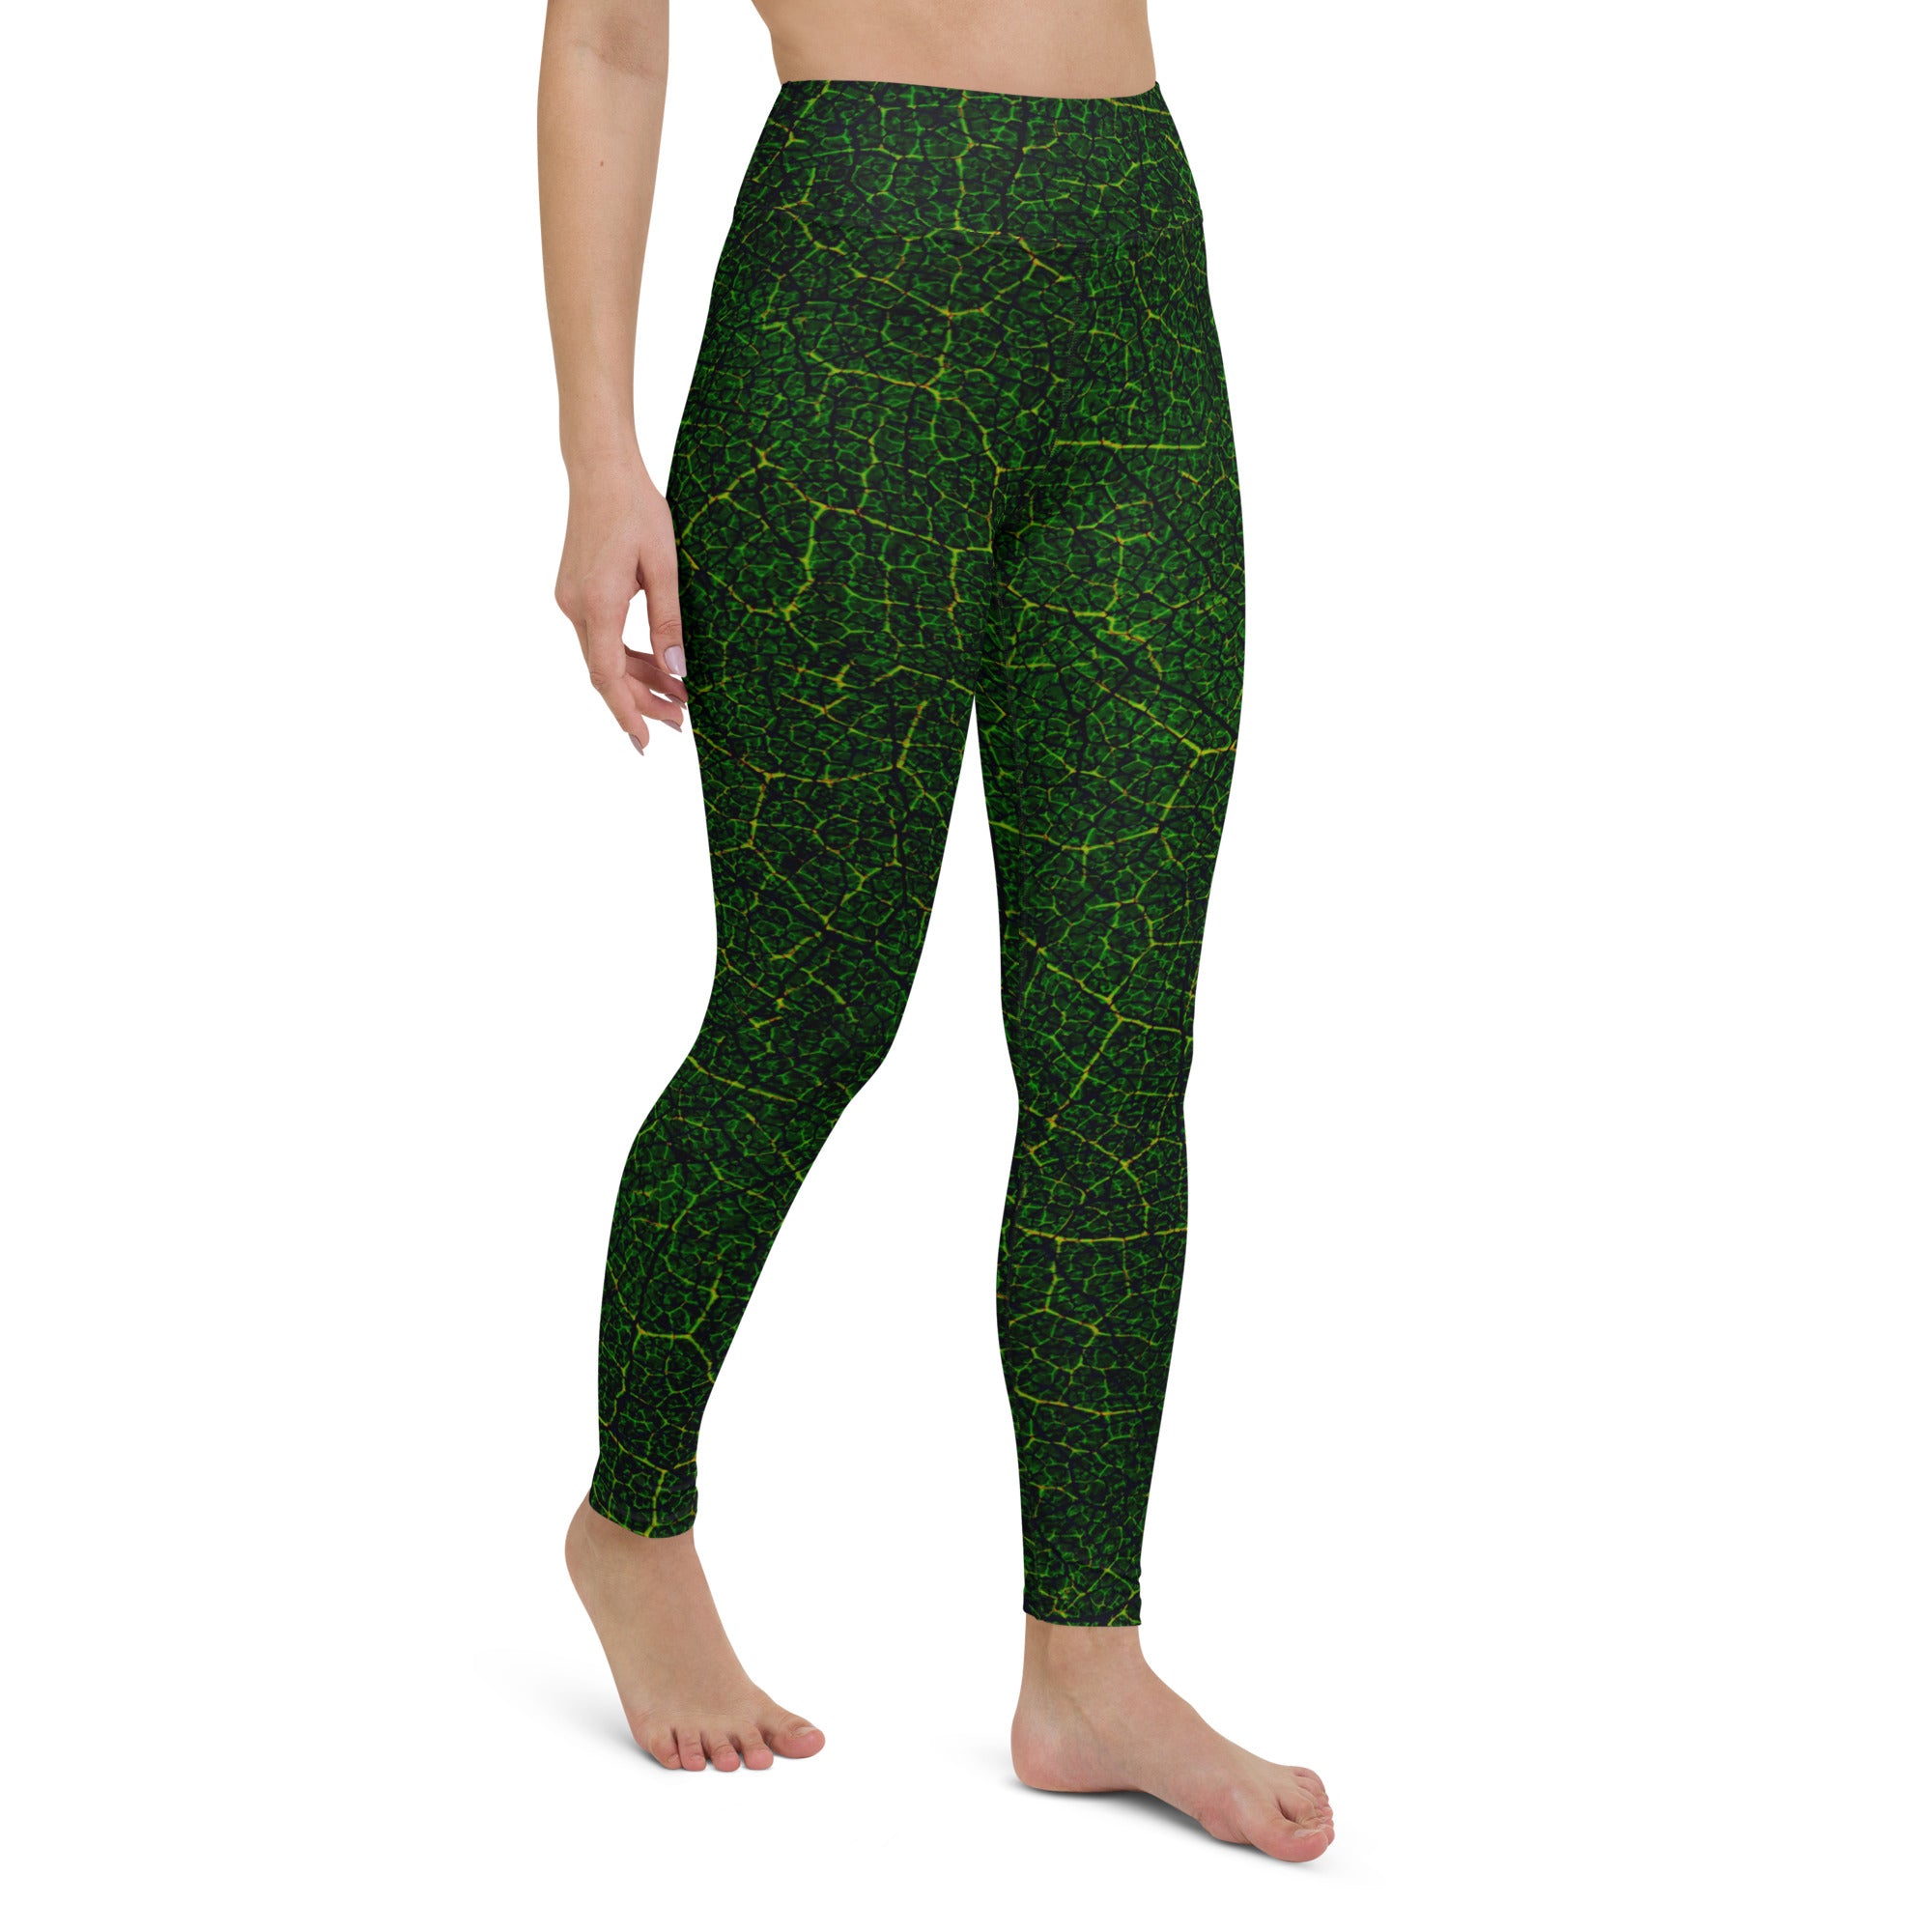 Styling Verdant Vines Yoga Leggings for a casual outing, demonstrating their versatility and nature-inspired charm.